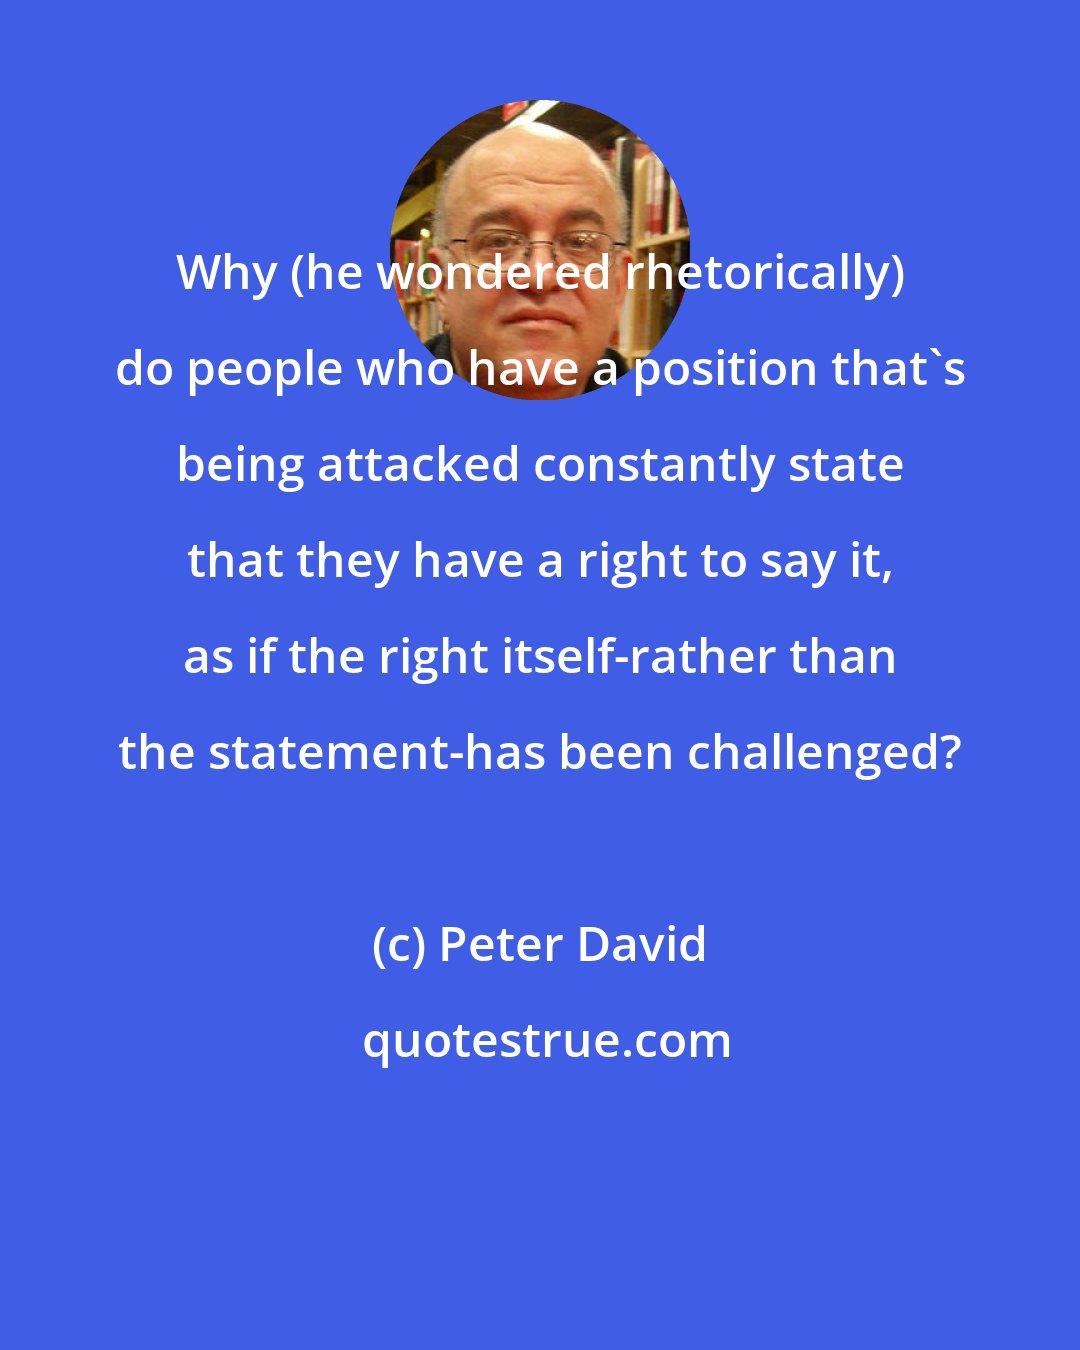 Peter David: Why (he wondered rhetorically) do people who have a position that's being attacked constantly state that they have a right to say it, as if the right itself-rather than the statement-has been challenged?